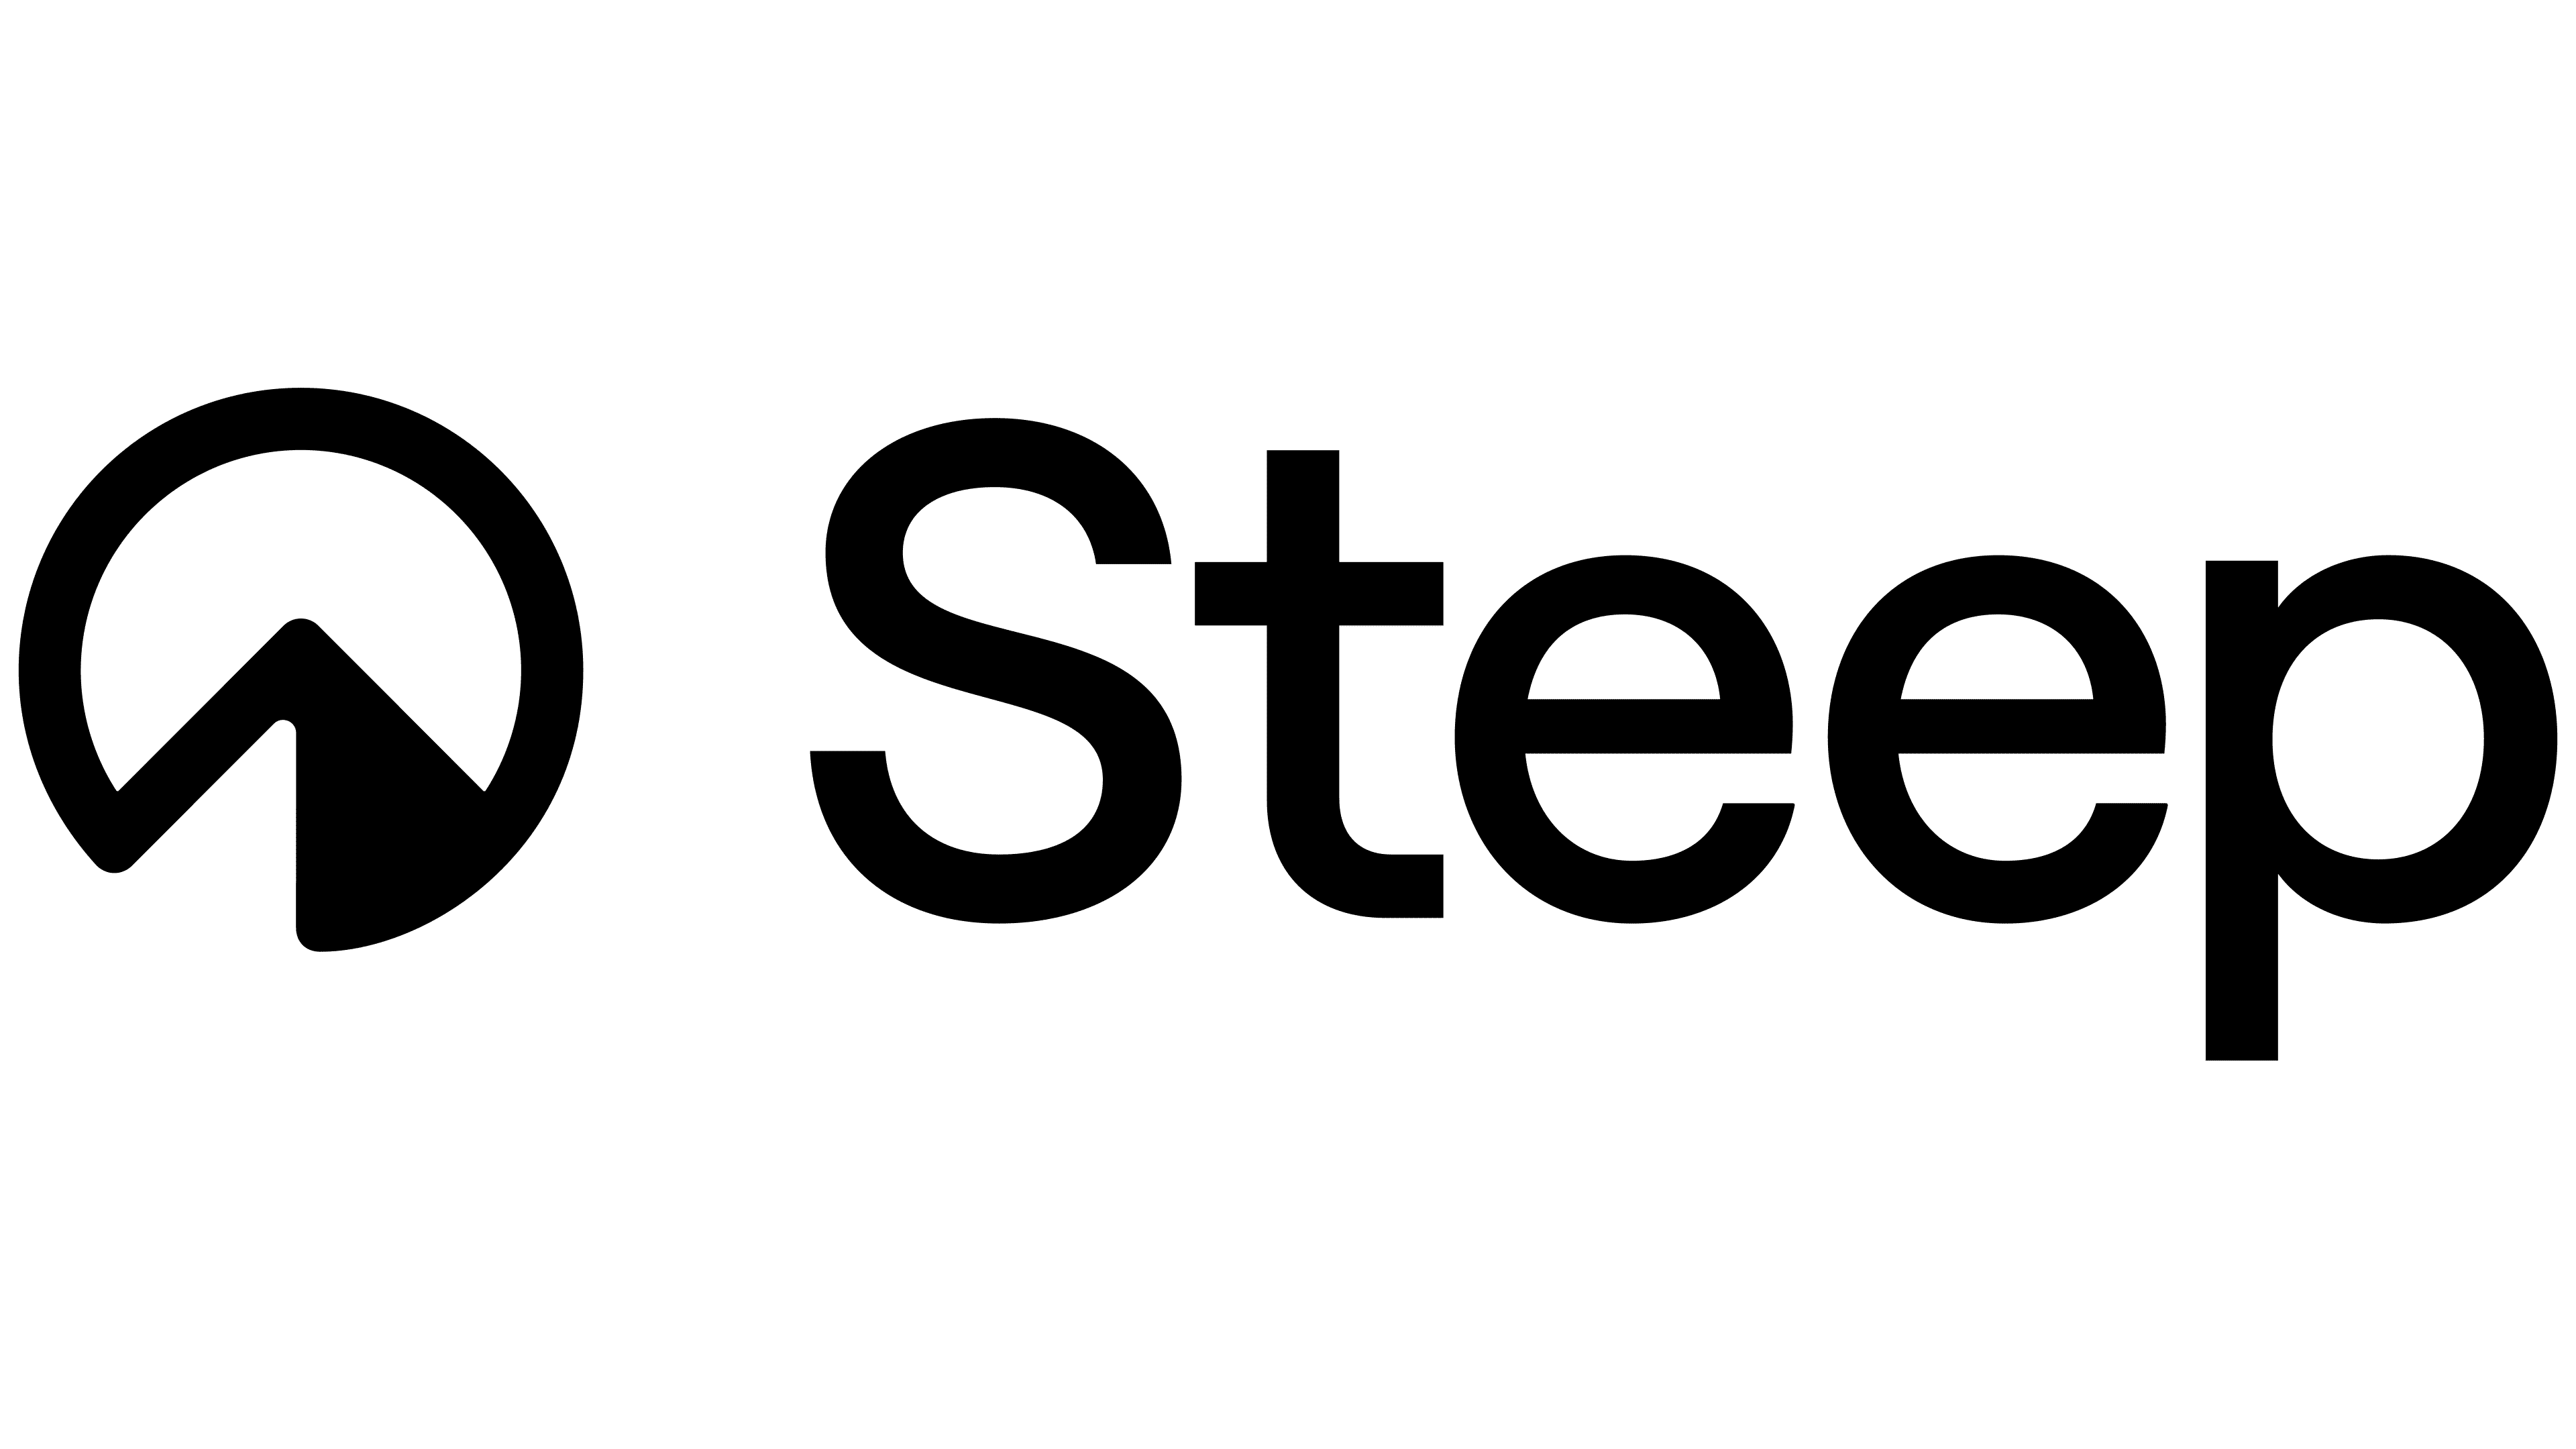 Steep's New Brand Identity Takes It to New Heights